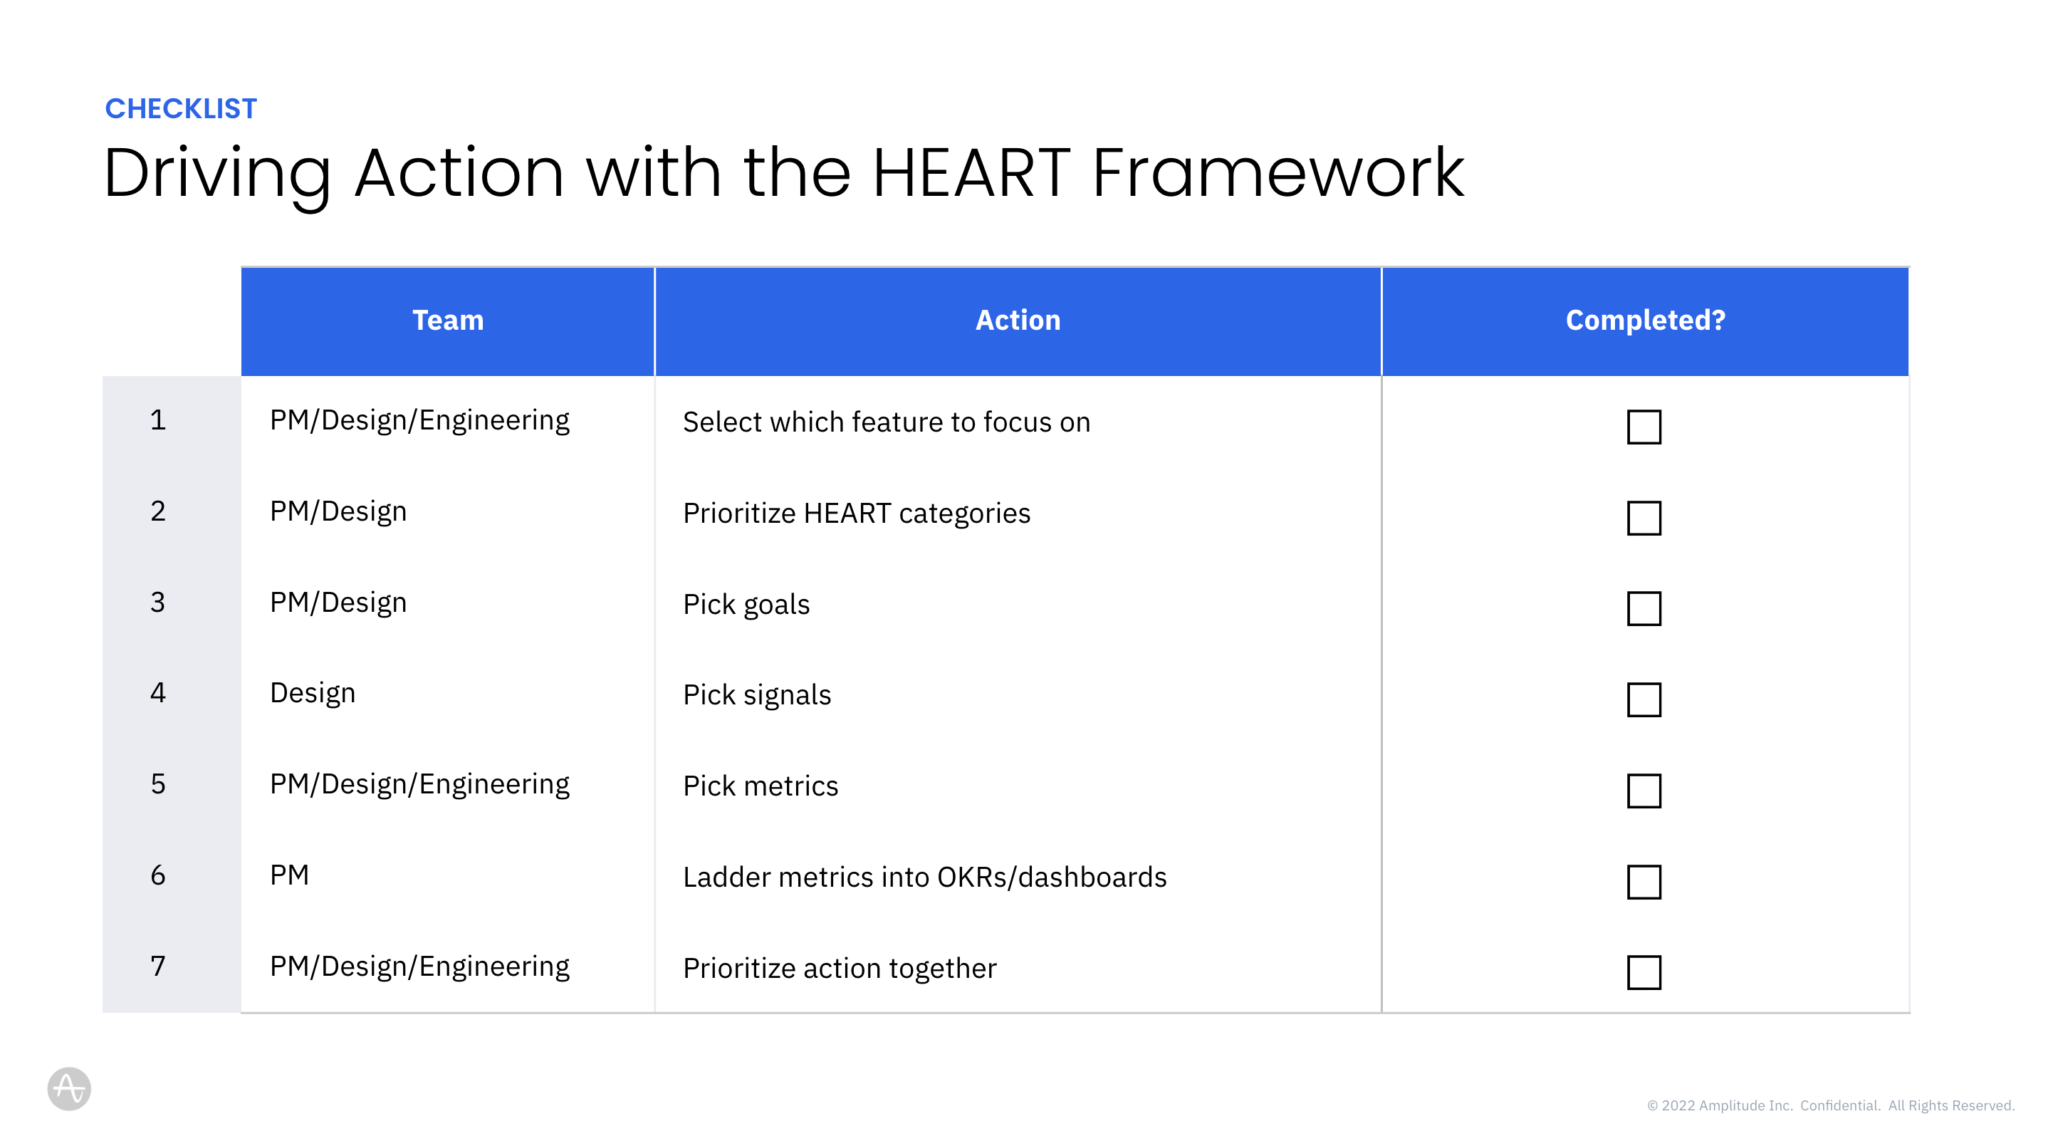 Driving action with the HEART framework